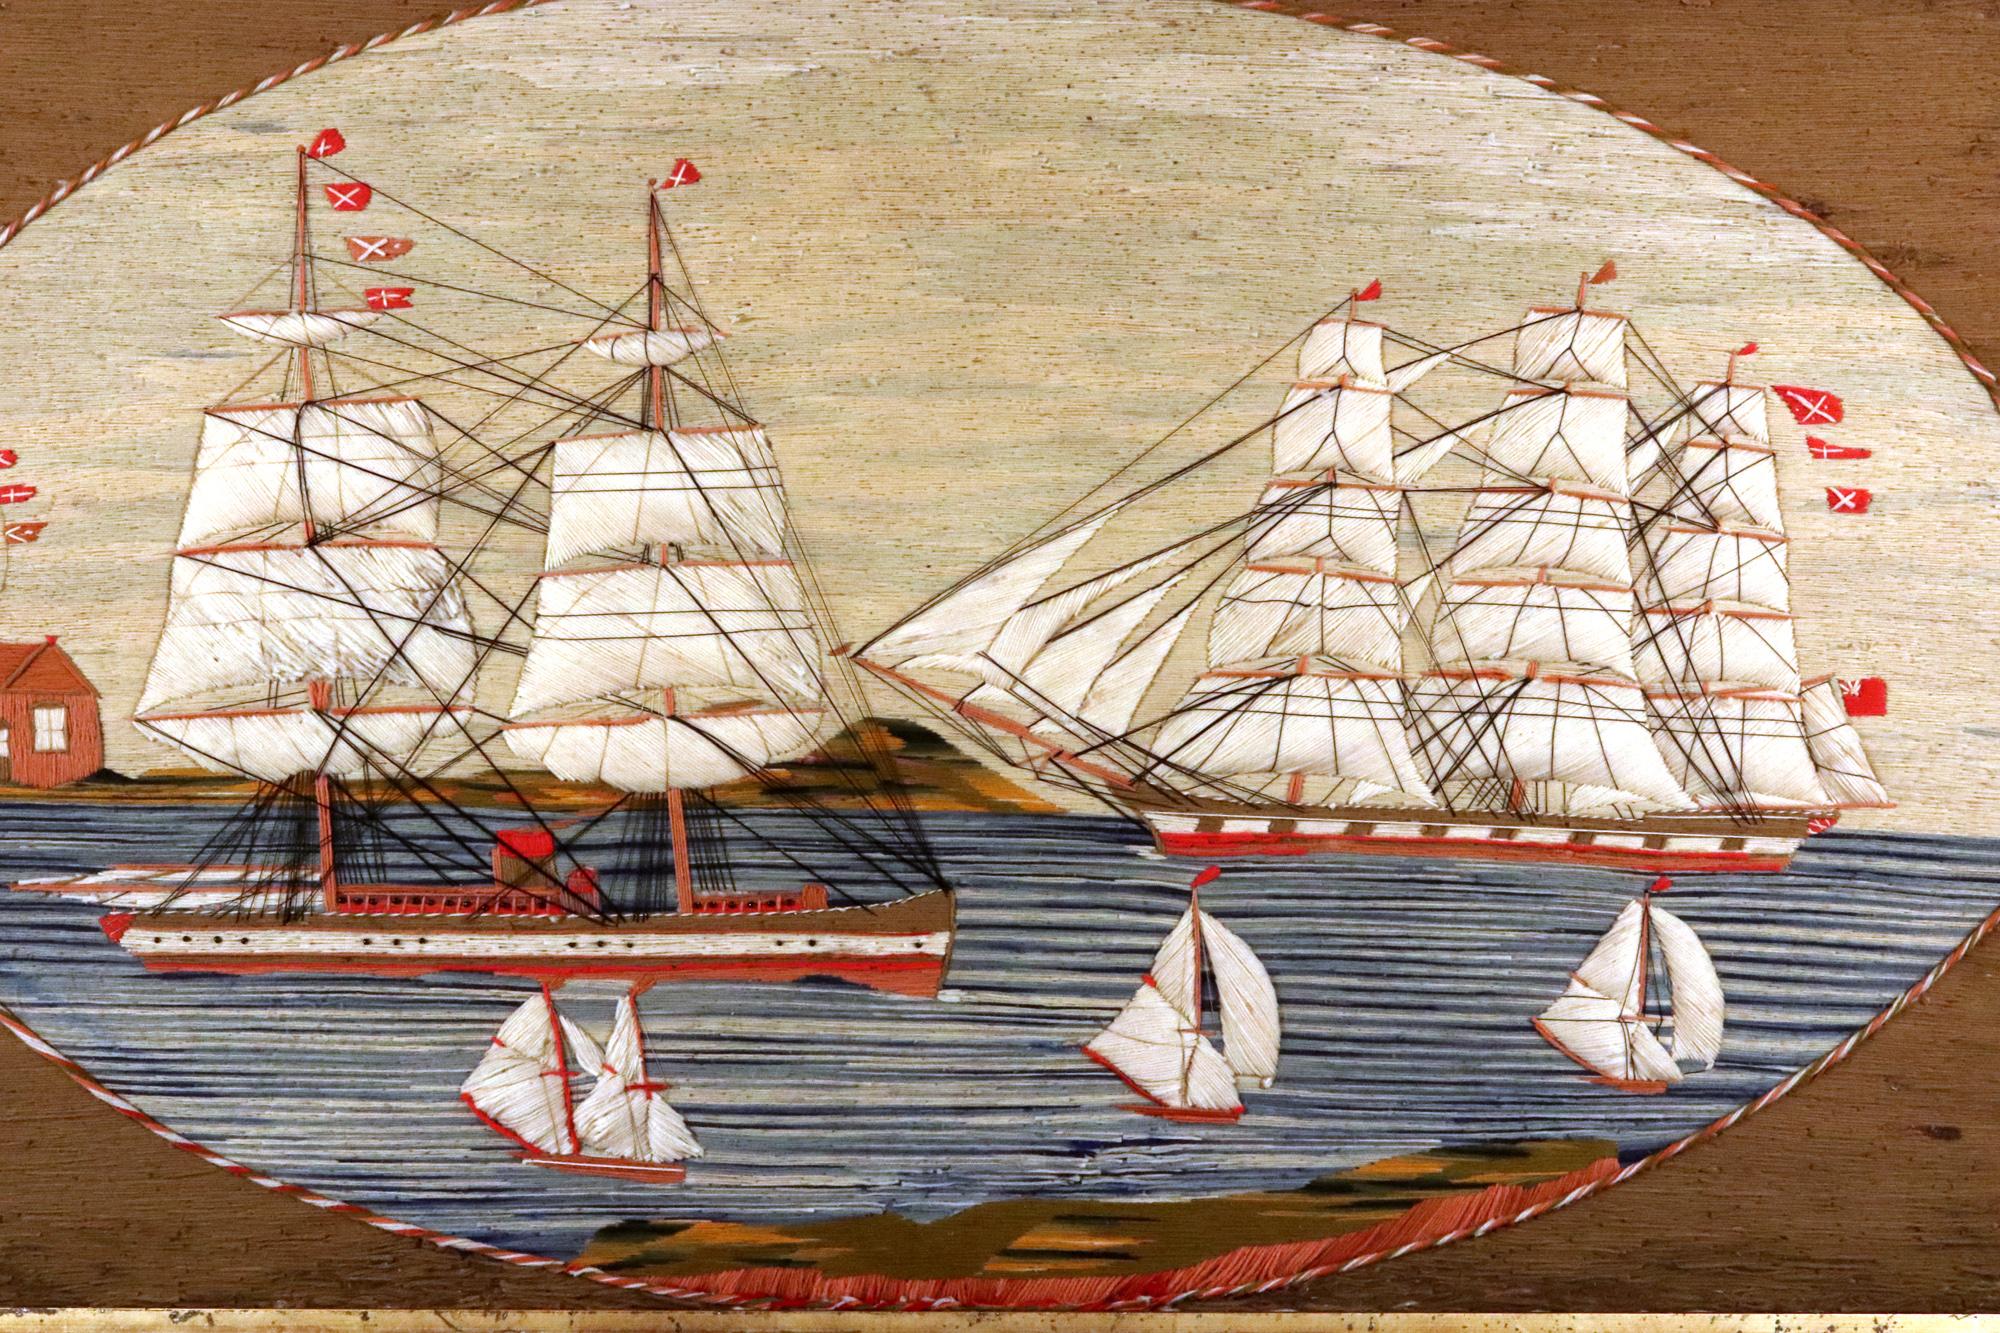 British Sailor's Woolwork with Five Ships in a Bay,
Circa 1875

The large sailor's woolwork depicts two large merchant sailing ships sailing in opposite directions to each other in a bay, one with two masts and one with three with a grass and rock